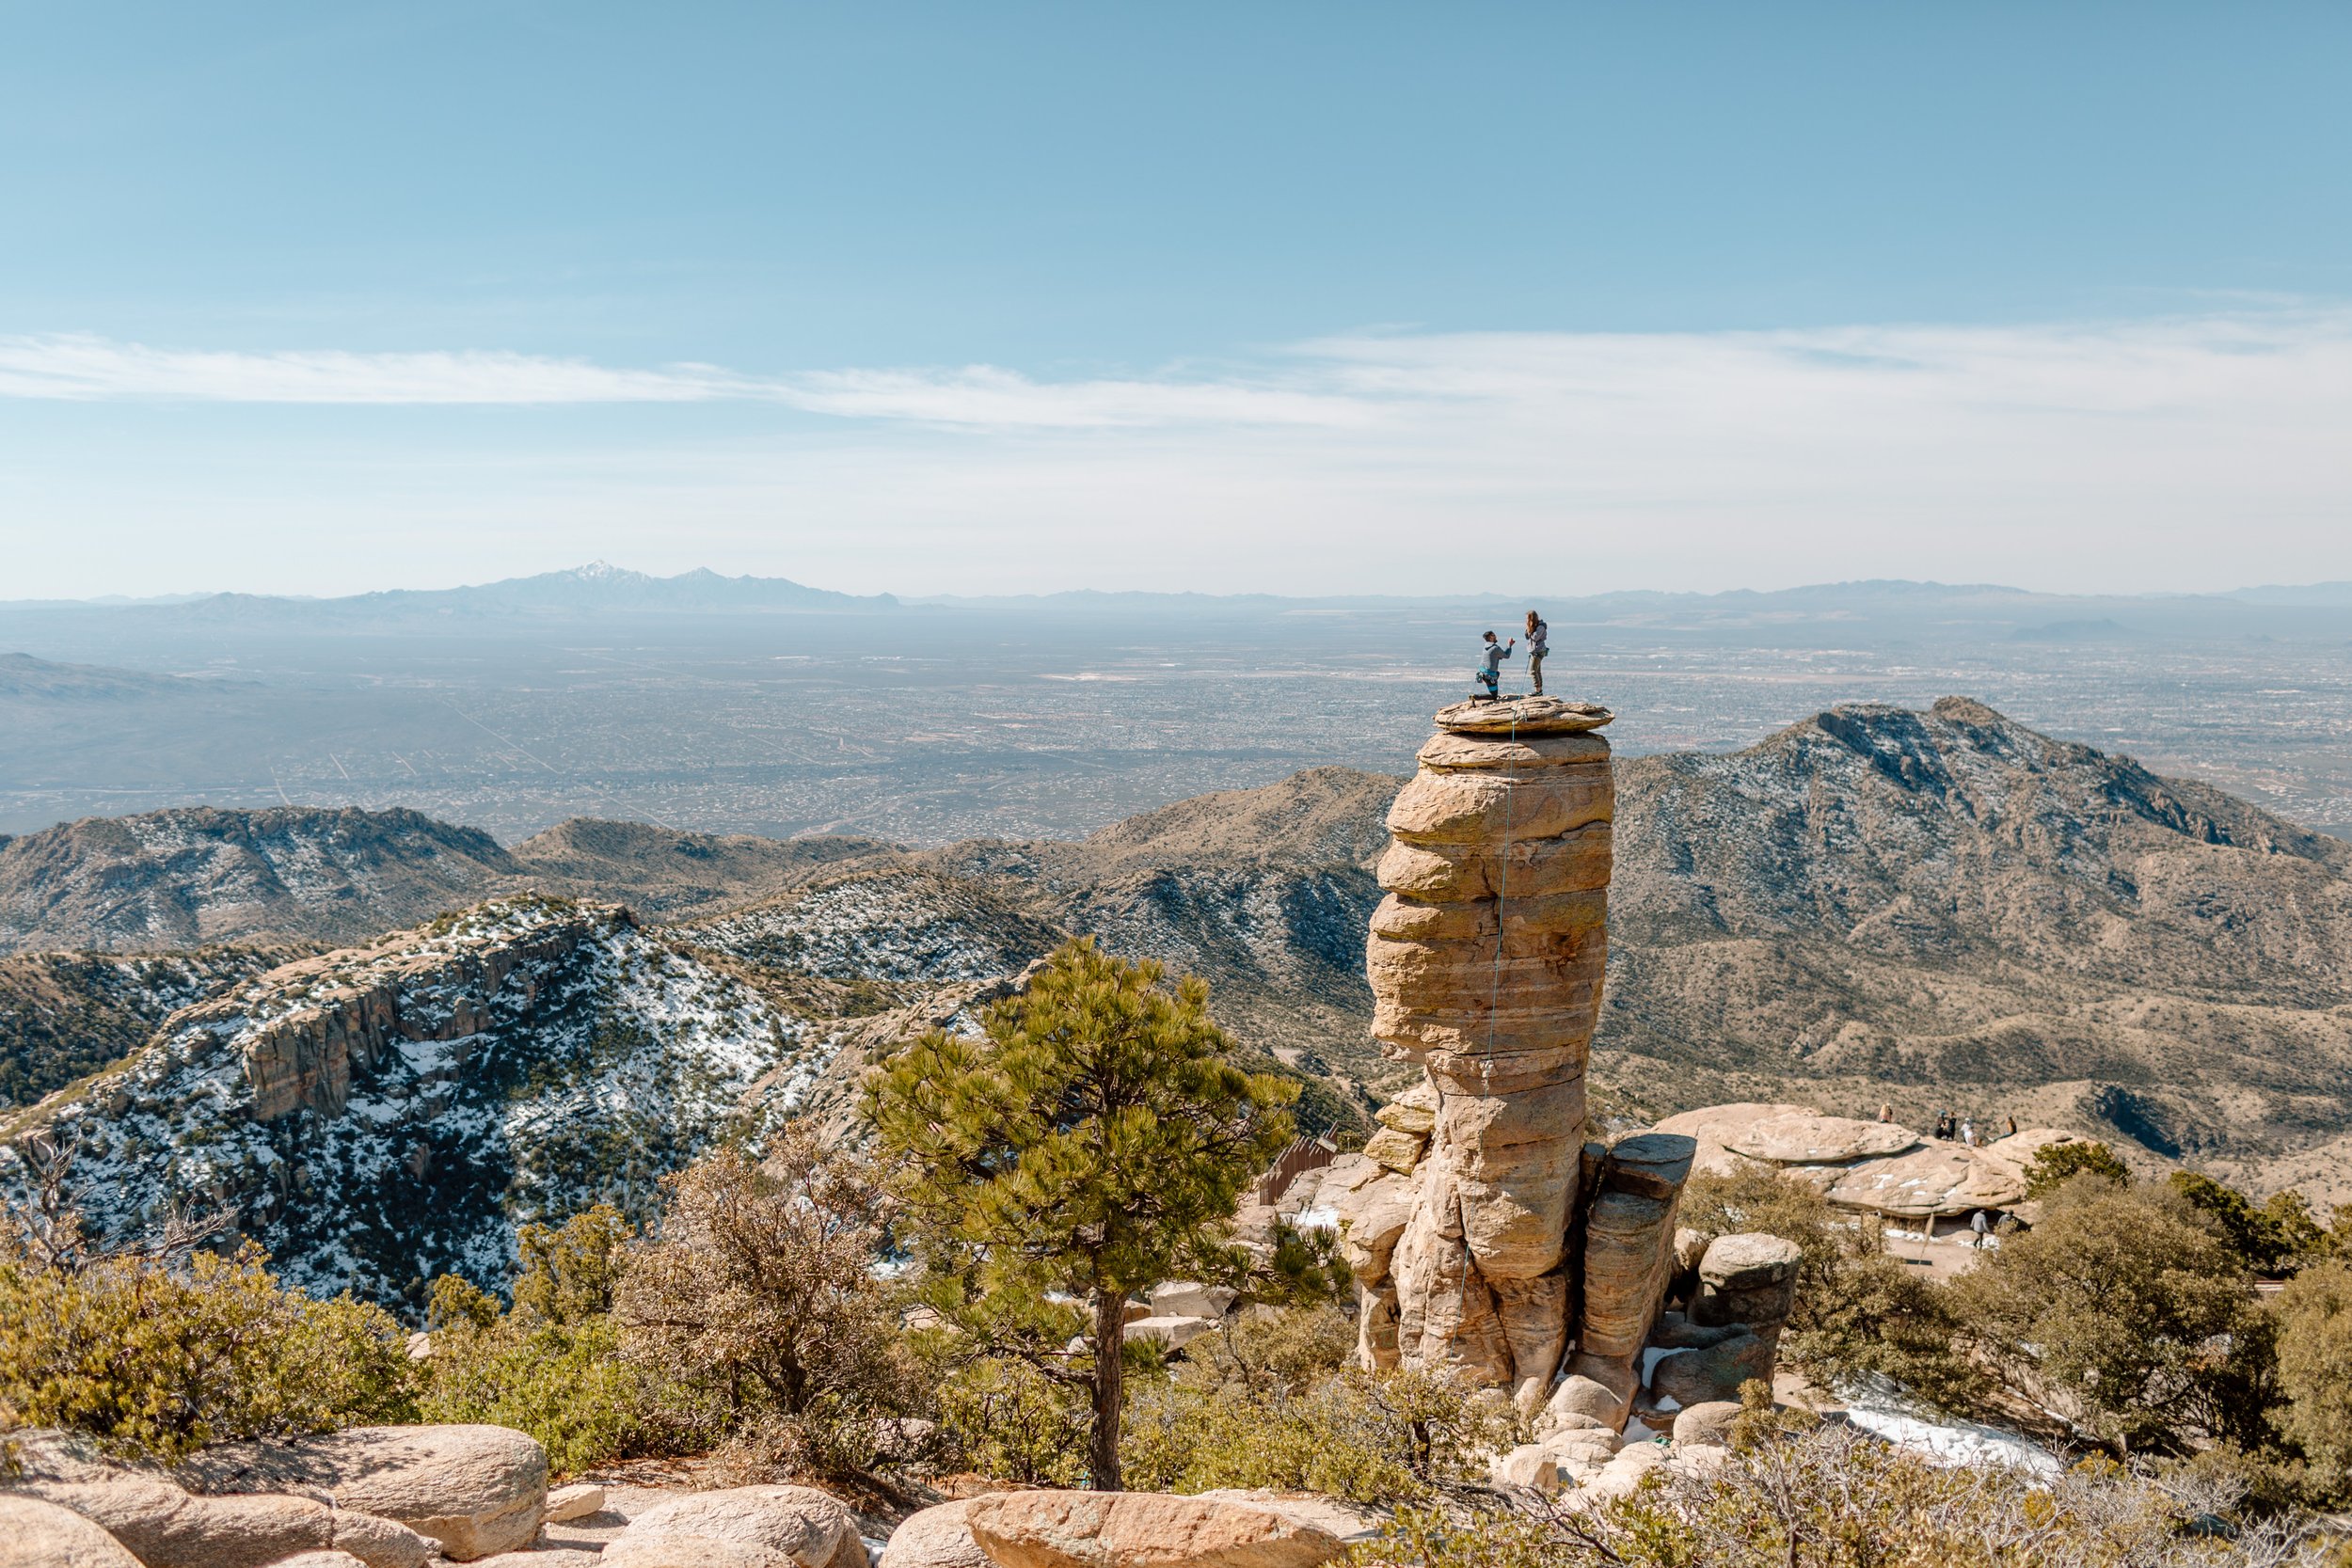  wide shot of a man proposing to his girlfriend on top of a hoodoo on mount lemmon arizona 